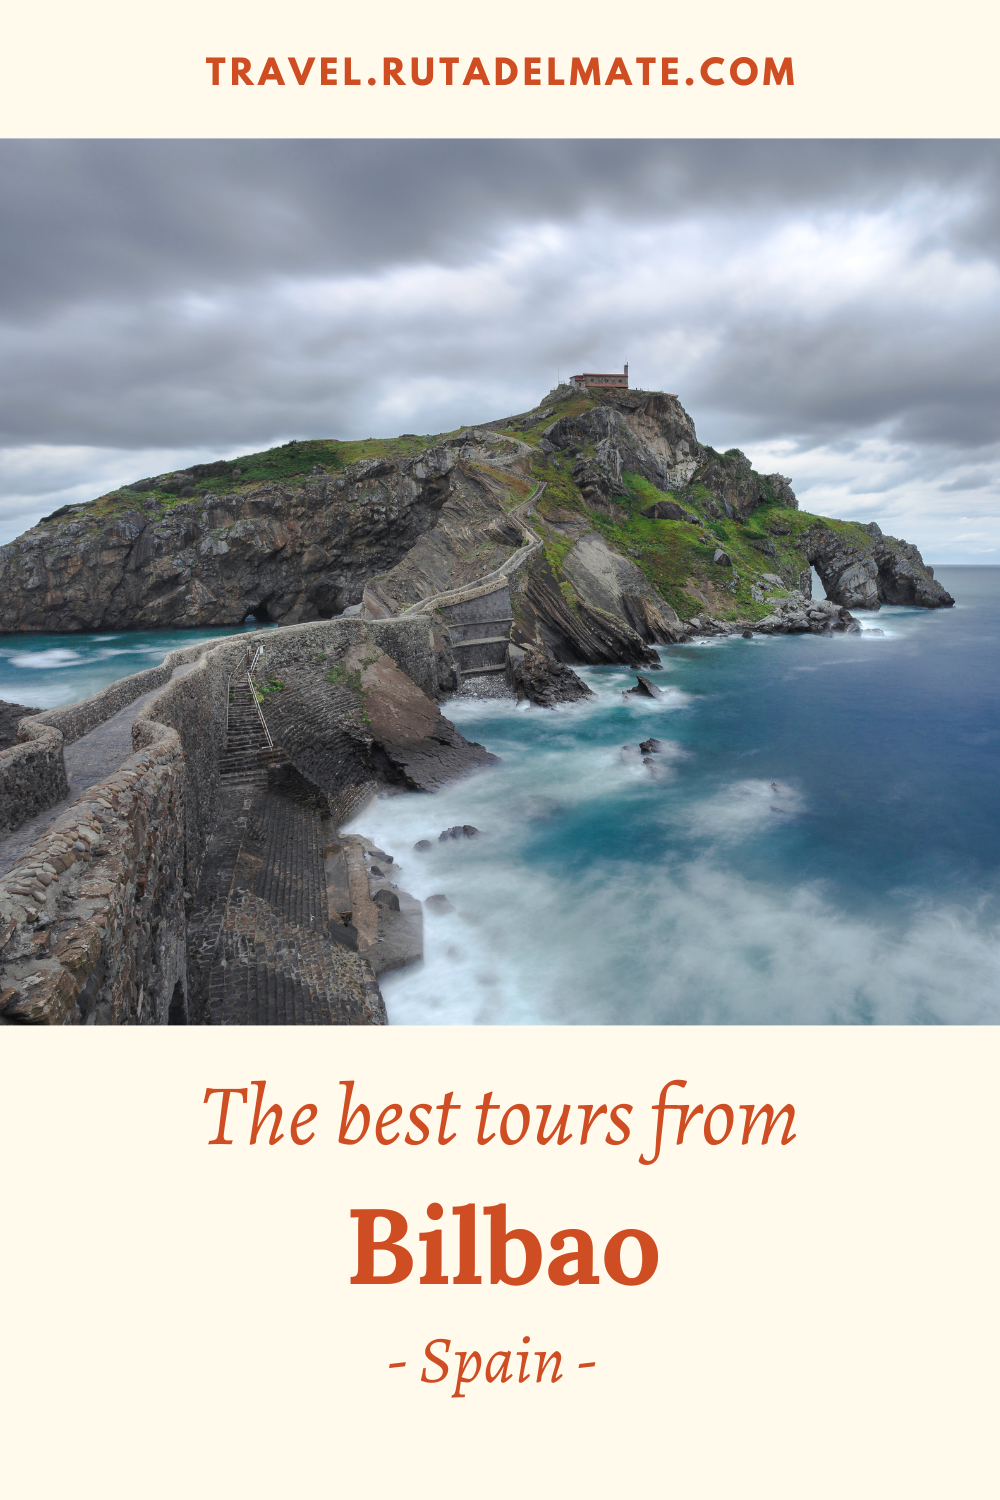 Tours from Bilbao